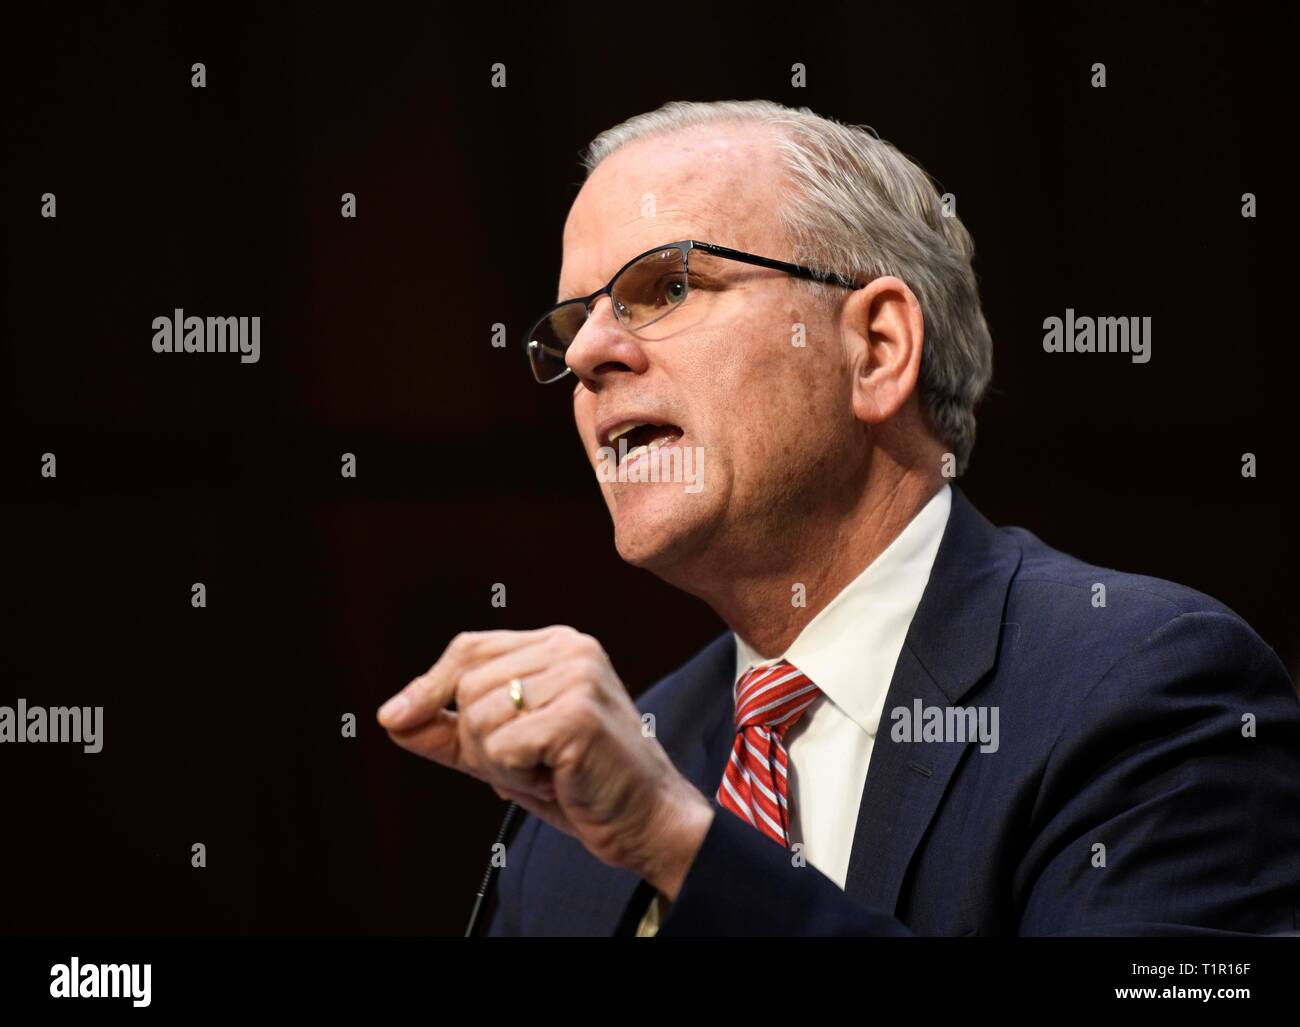 Washington, USA. 27th Mar, 2019. Daniel Elwell, acting administrator of the U.S. Federal Aviation Administration (FAA), speaks at a Senate Commerce Committee hearing on airline safety in Washington, DC, the United States, on March 27, 2019. The U.S. Federal Aviation Administration (FAA) on Wednesday vowed to revamp its air safety oversight after two deadly crashes involving Boeing 737 Max jets in less than five months pointed to possible lapses in the aircraft approval process. Credit: Liu Jie/Xinhua/Alamy Live News Stock Photo